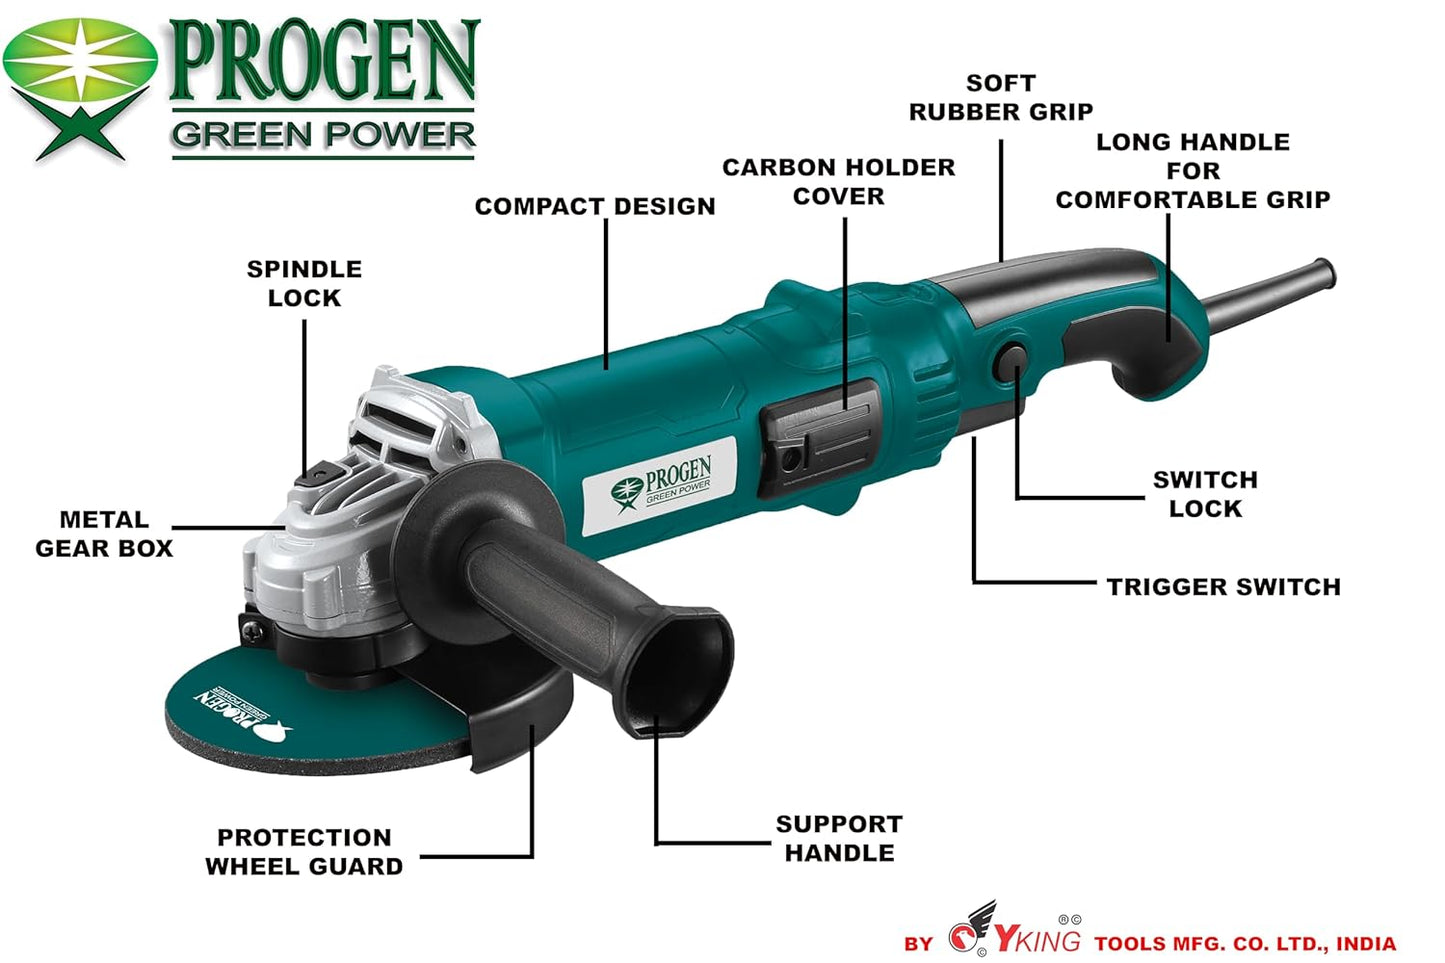 PROGEN 9105-HG, 5-inch, 1600W Heavy Duty Angle Grinder - Versatile Multipurpose Cutter & Grinder Machine for Grinding, Cutting, Sharpening, Polishing - Professional Angle Grinders